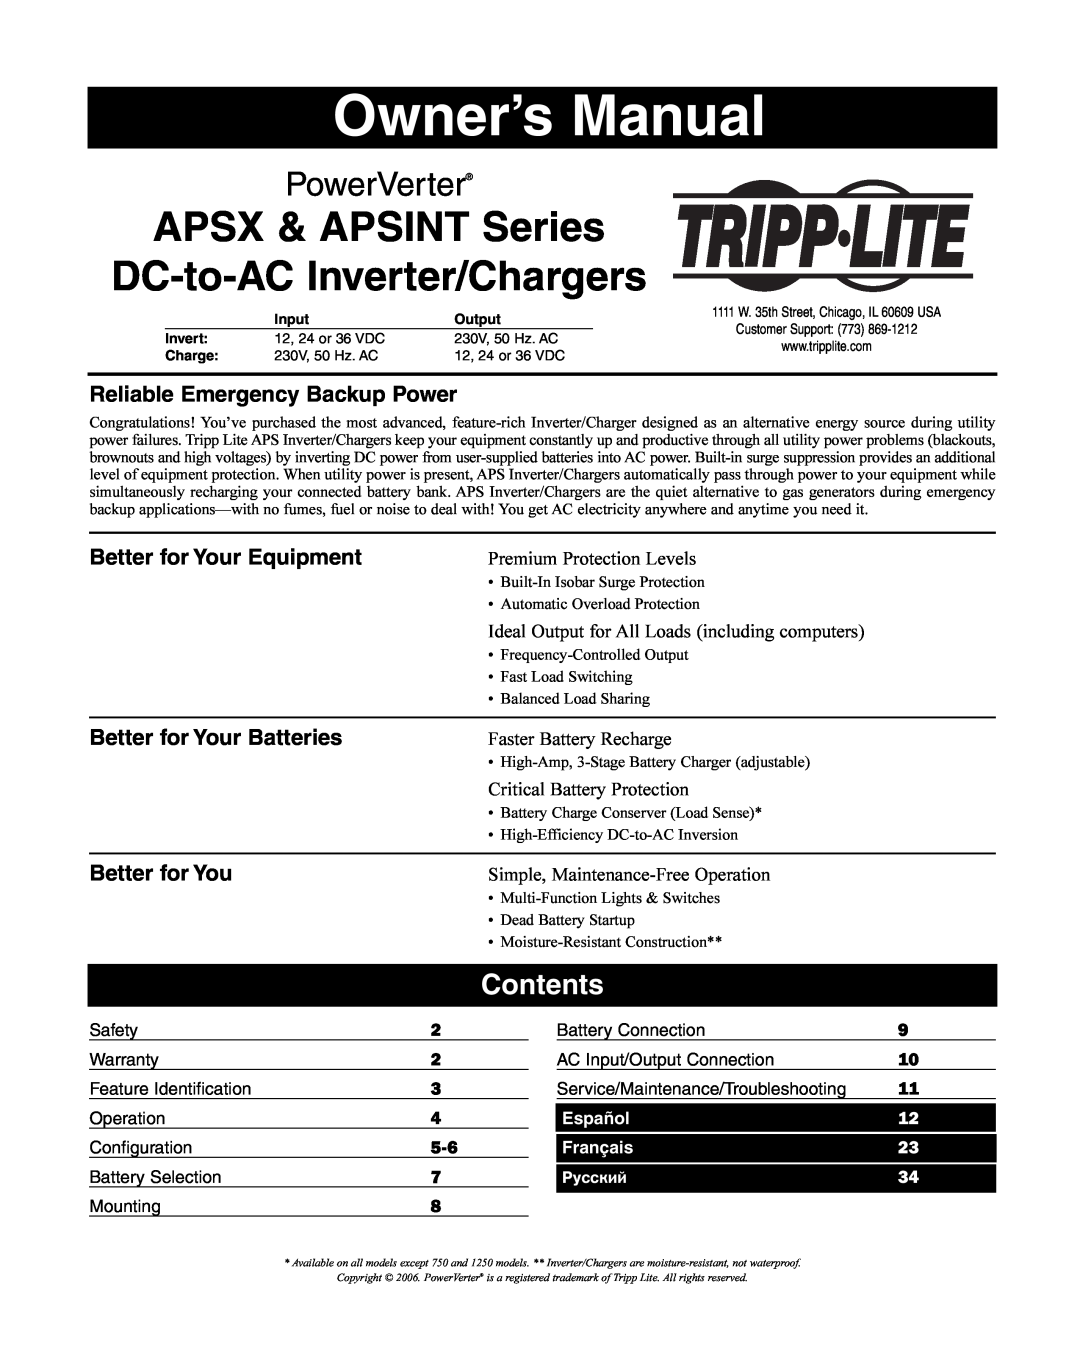 Tripp Lite APSINT Series owner manual Contents, Reliable Emergency Backup Power, Better for Your Equipment, Owner’s Manual 